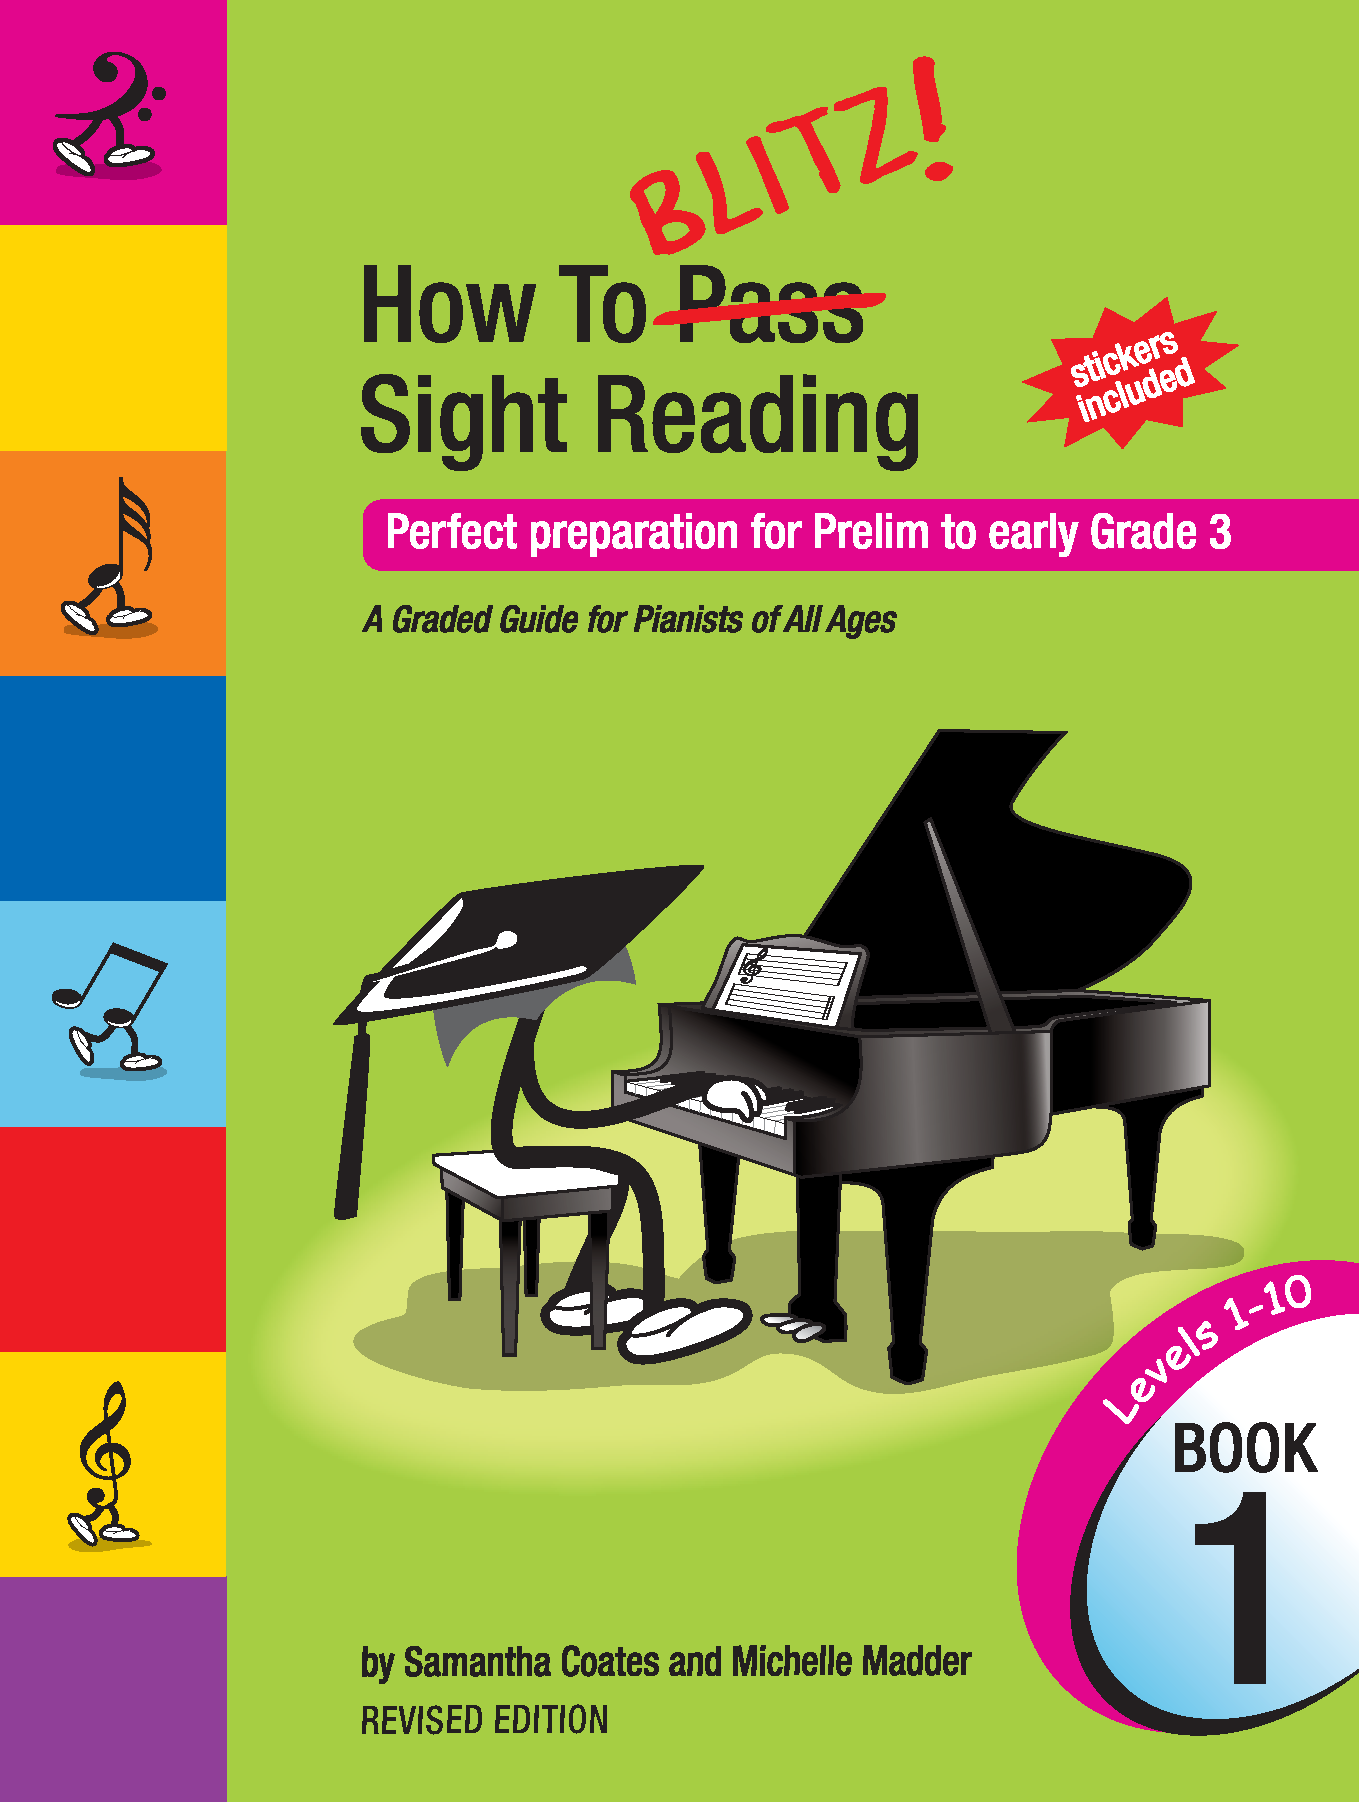 How To Blitz! Sight Reading Book 1